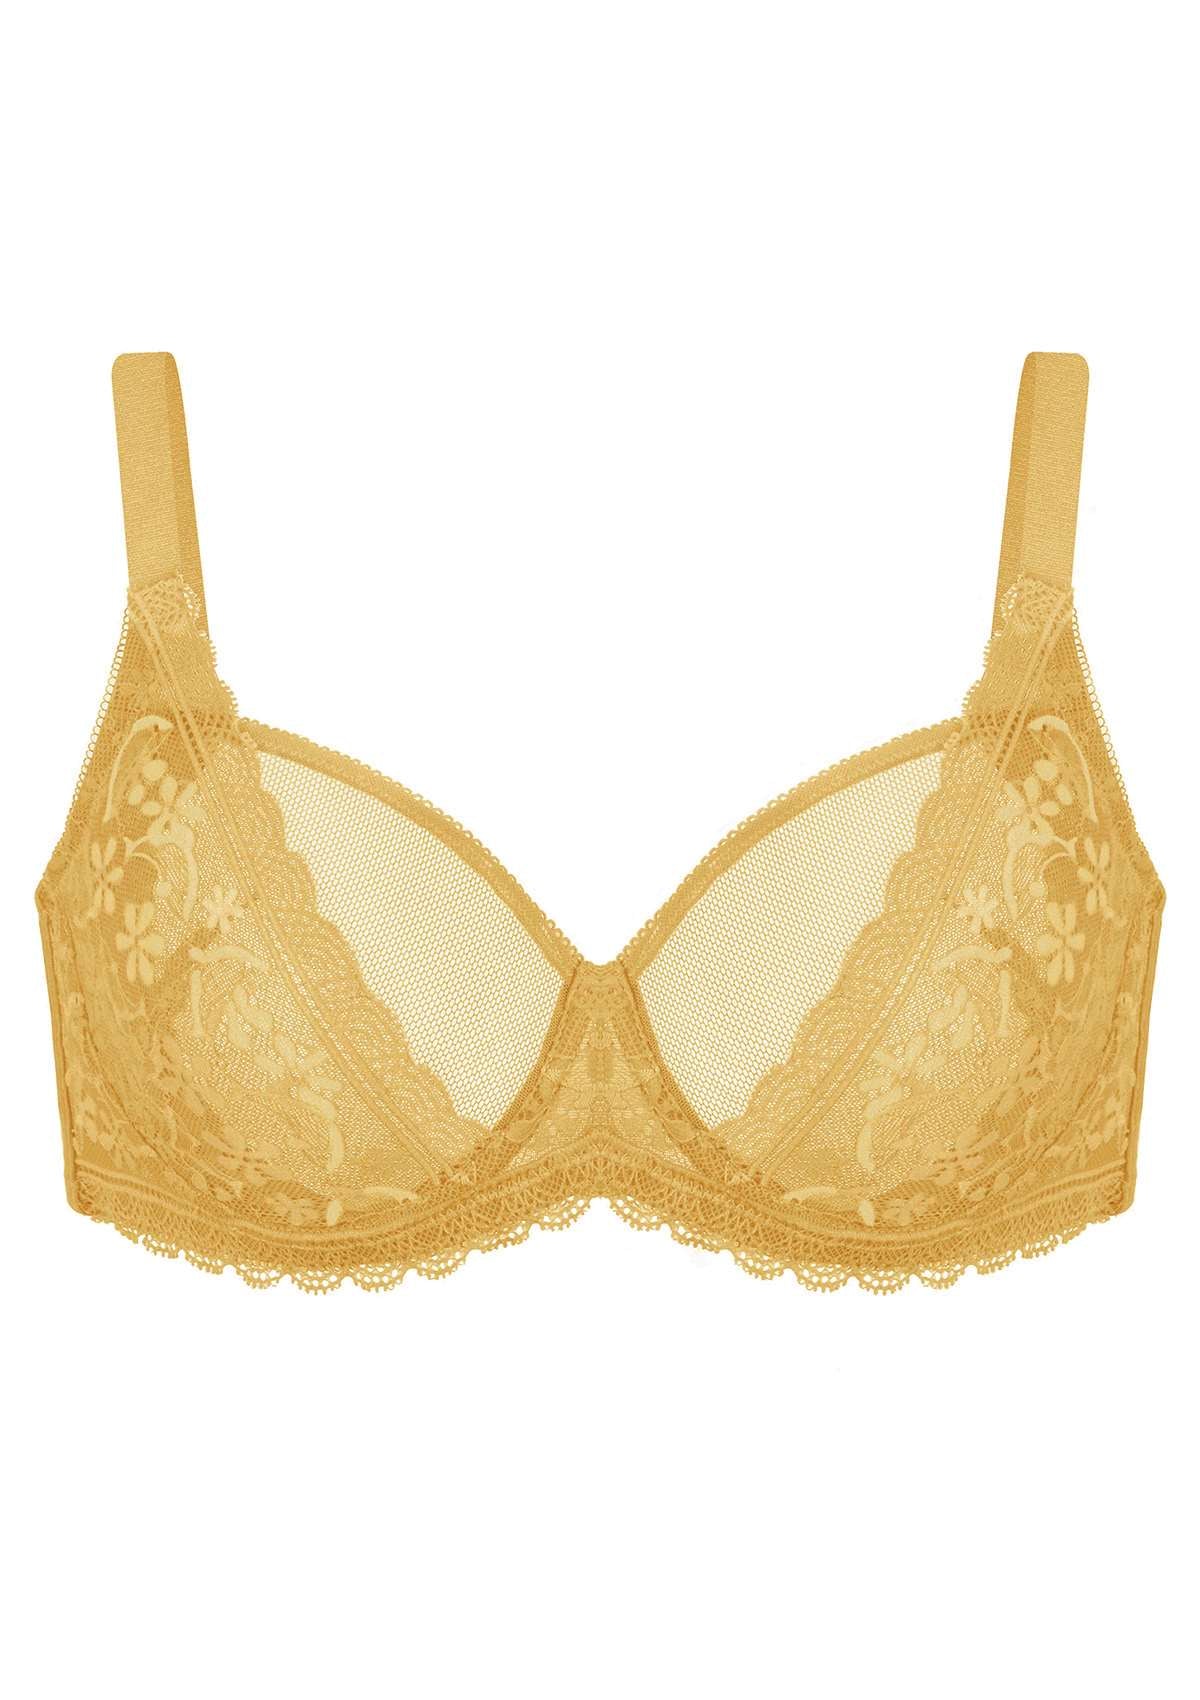 HSIA Anemone Lace Unlined Bra: Supportive, Lightweight Bra - Ginger / 40 / DDD/F